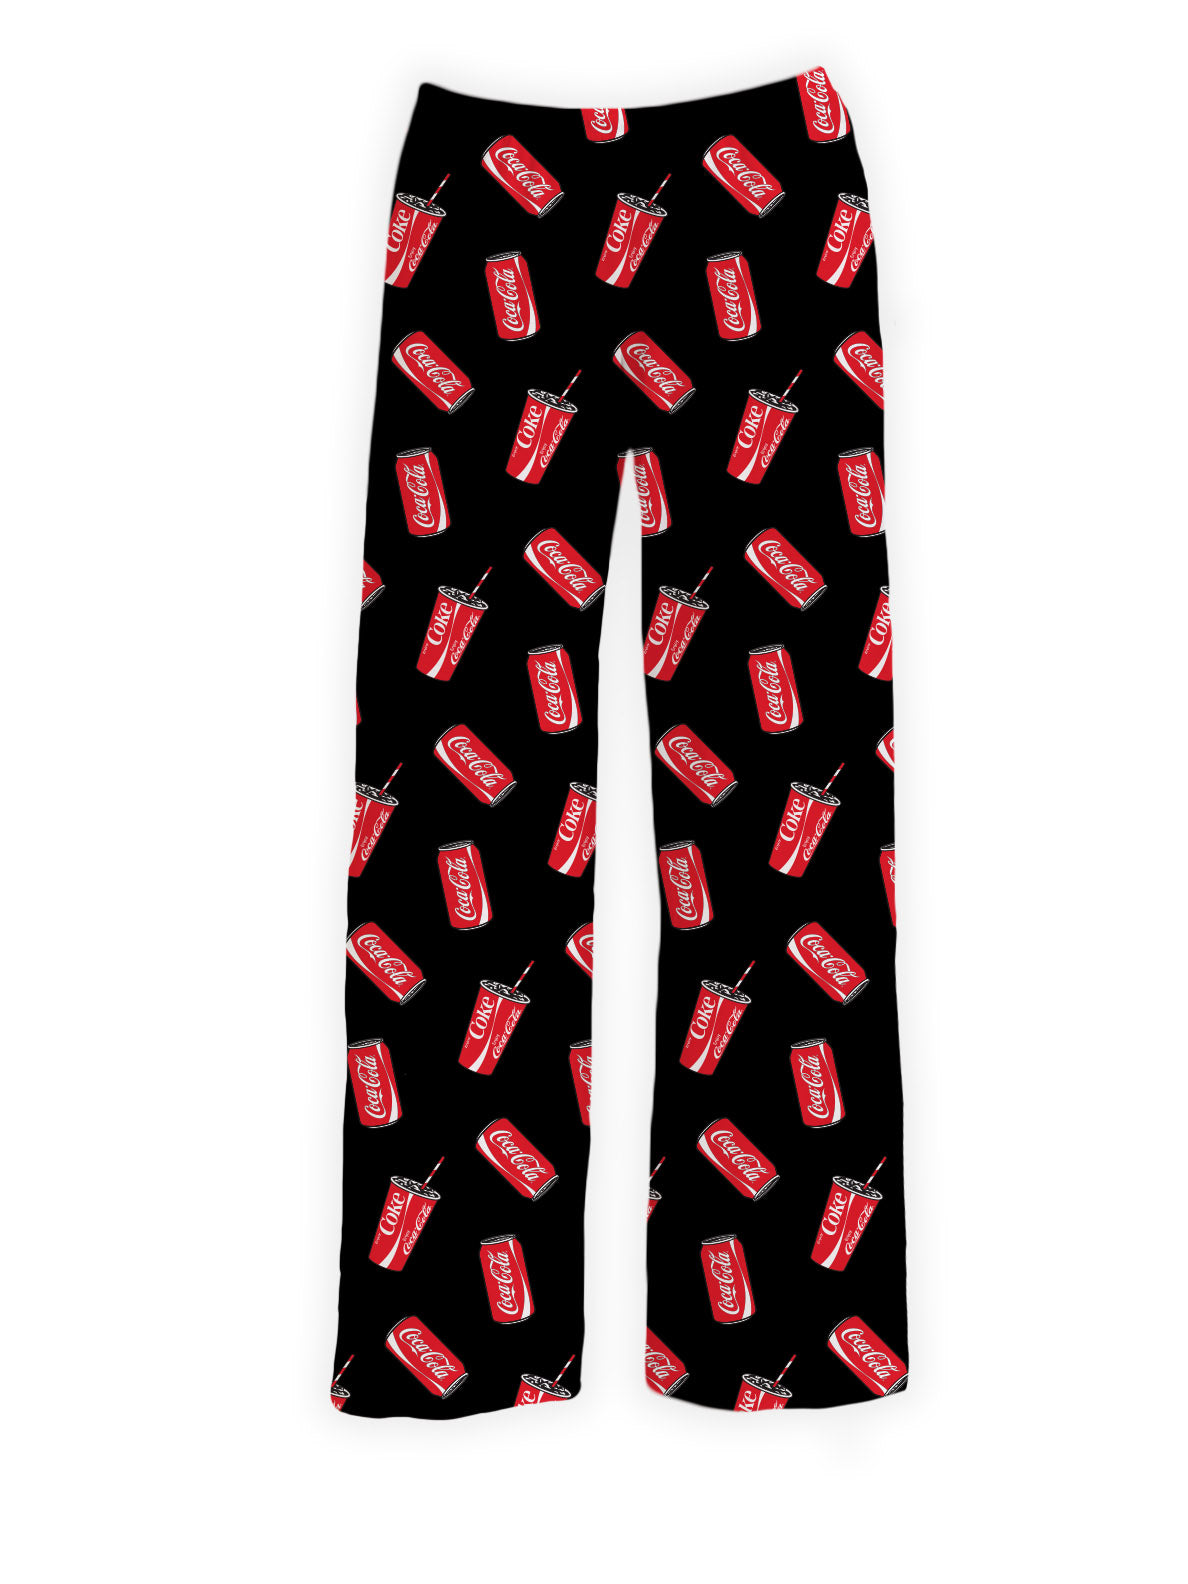 BRIEF INSANITY Coca-Cola Can & Cup Pattern Pajama Lounge Pants